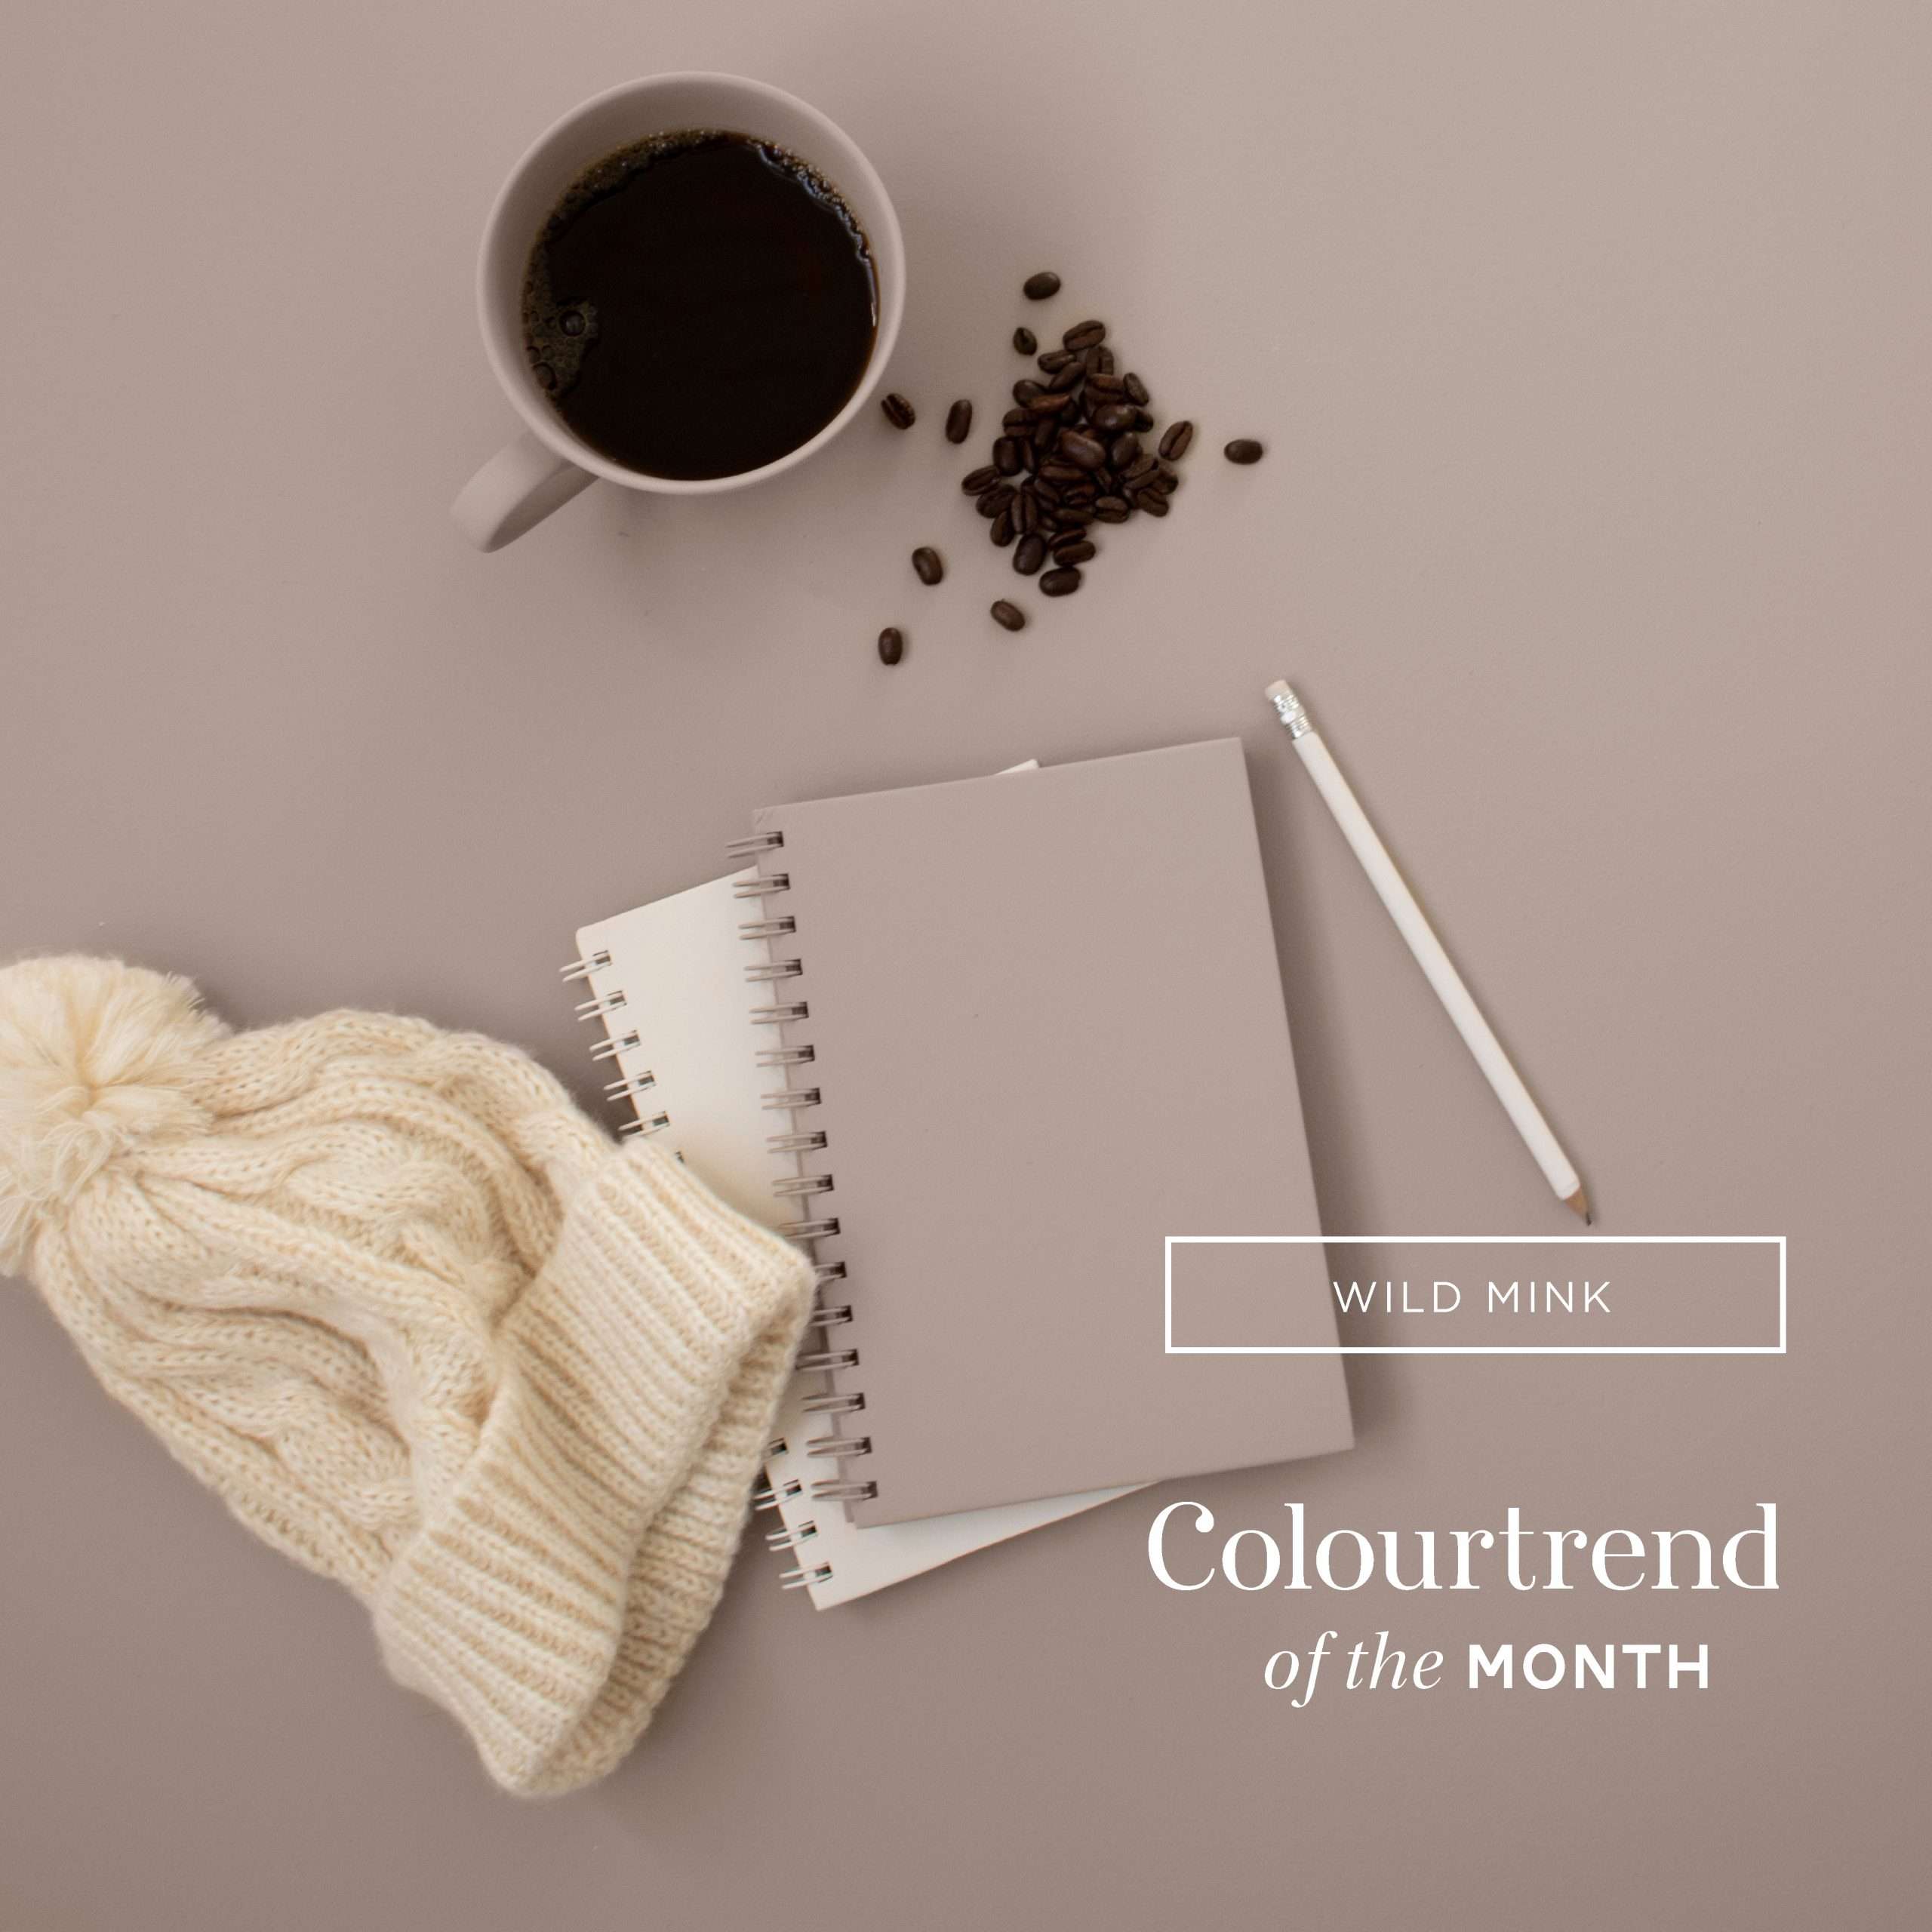 Colourtrend Wild Mink | Same Day Dublin Delivery by Weirs of Baggot St